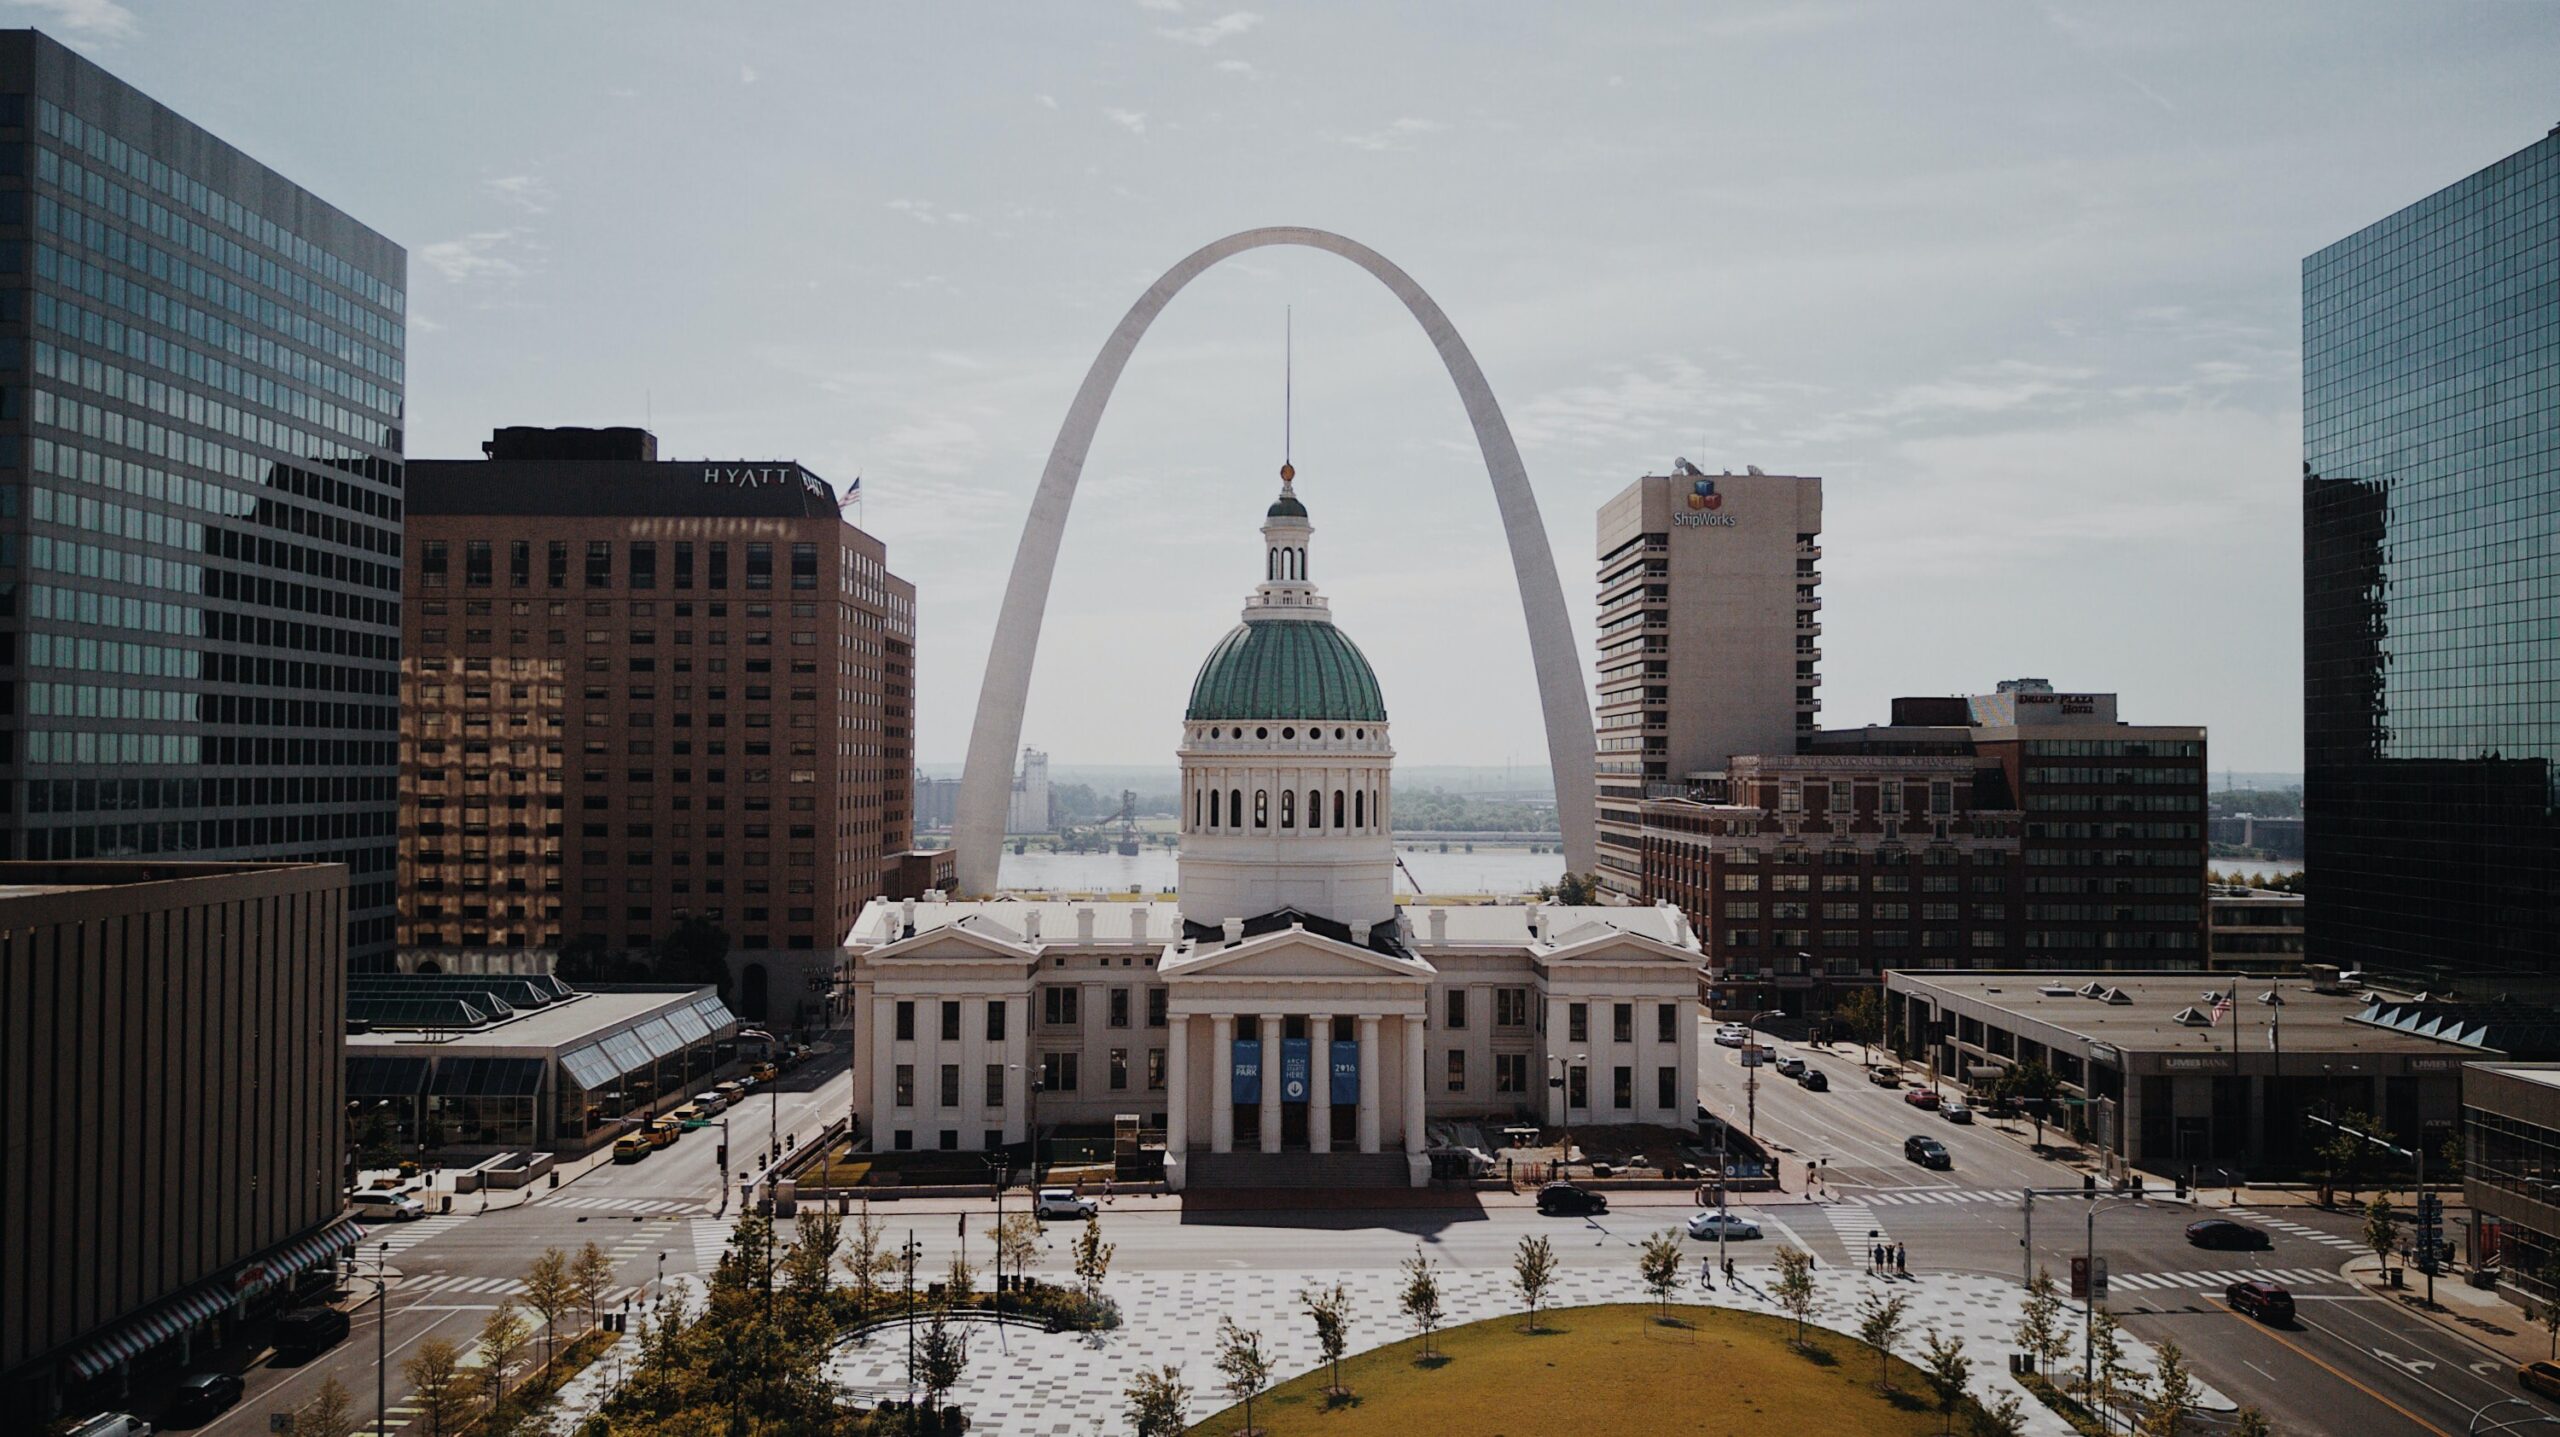 Image of St. Louis courthouse with the St. Louis Arch in the back. 